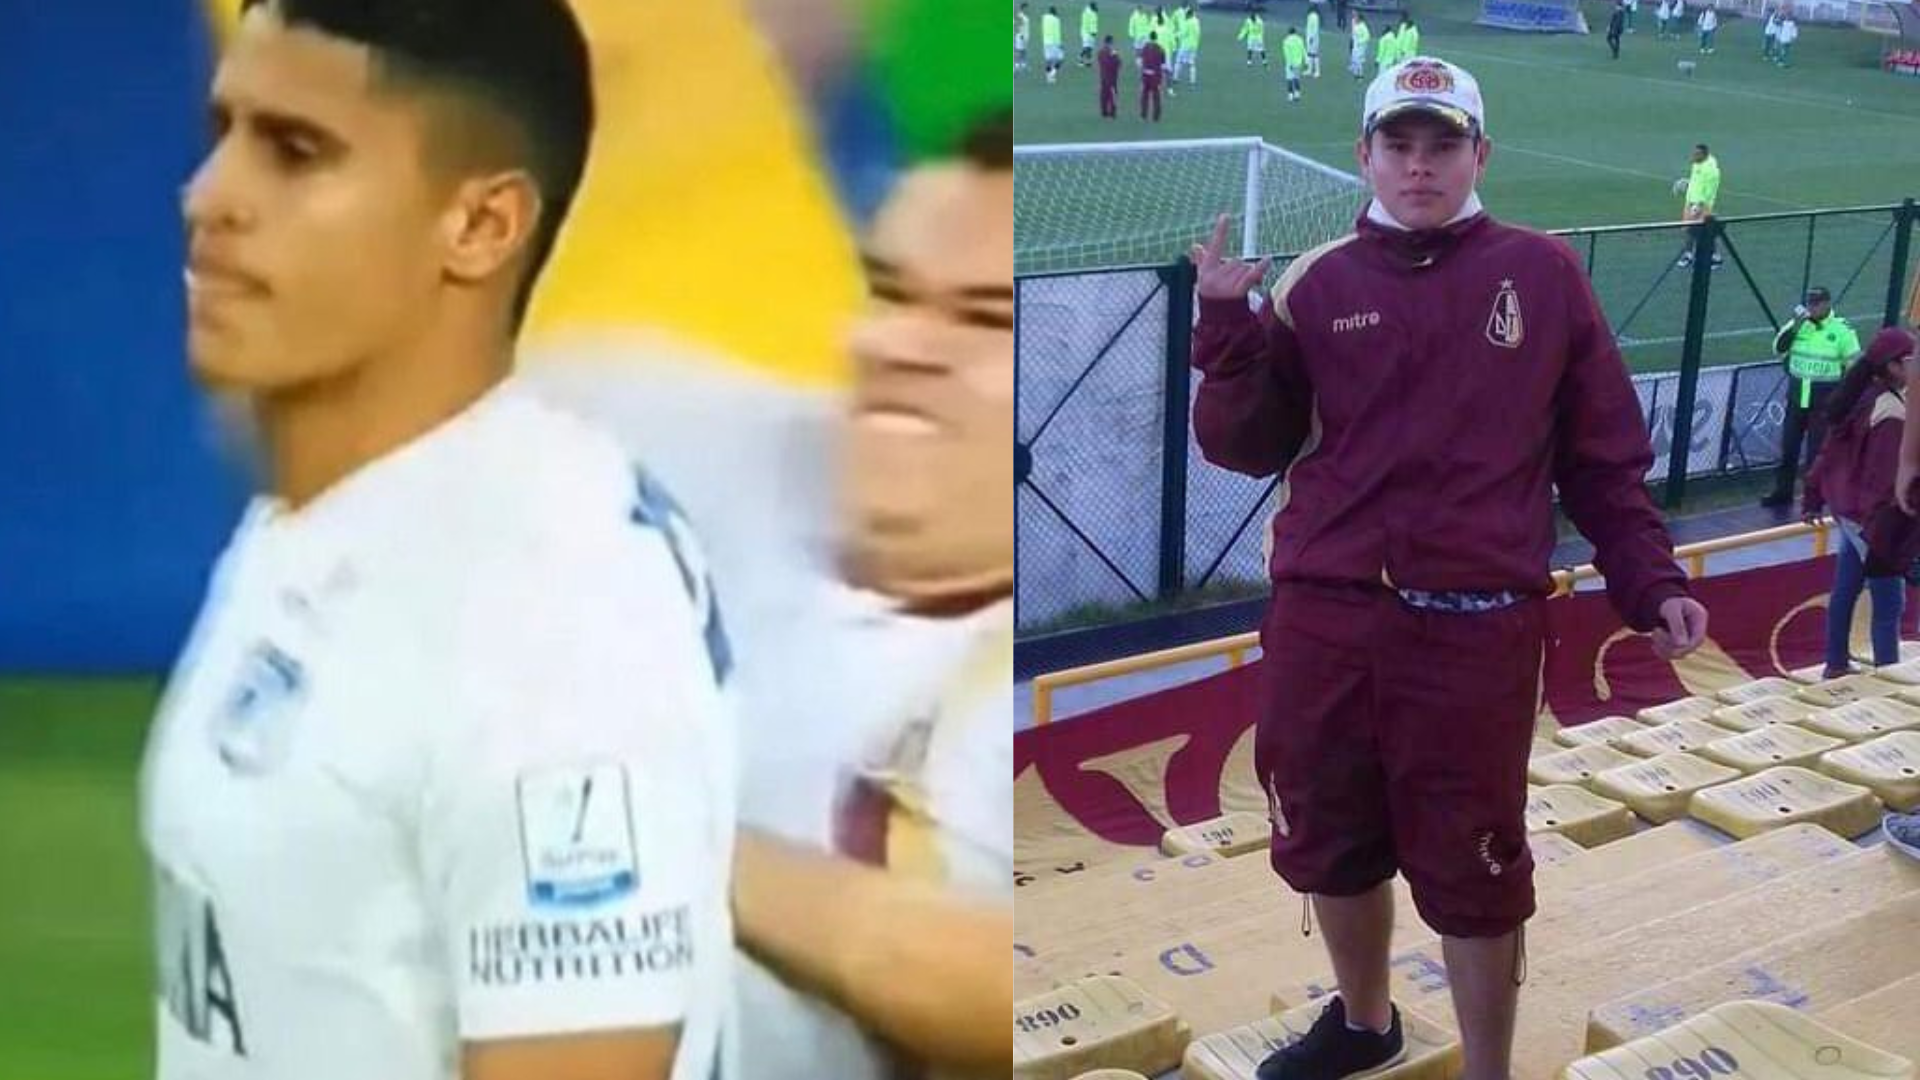 Alejandro Montenegro was identified as the fan who attacked the Millonarios player, Daniel Cataño.  @ortegaFede/Twitter.